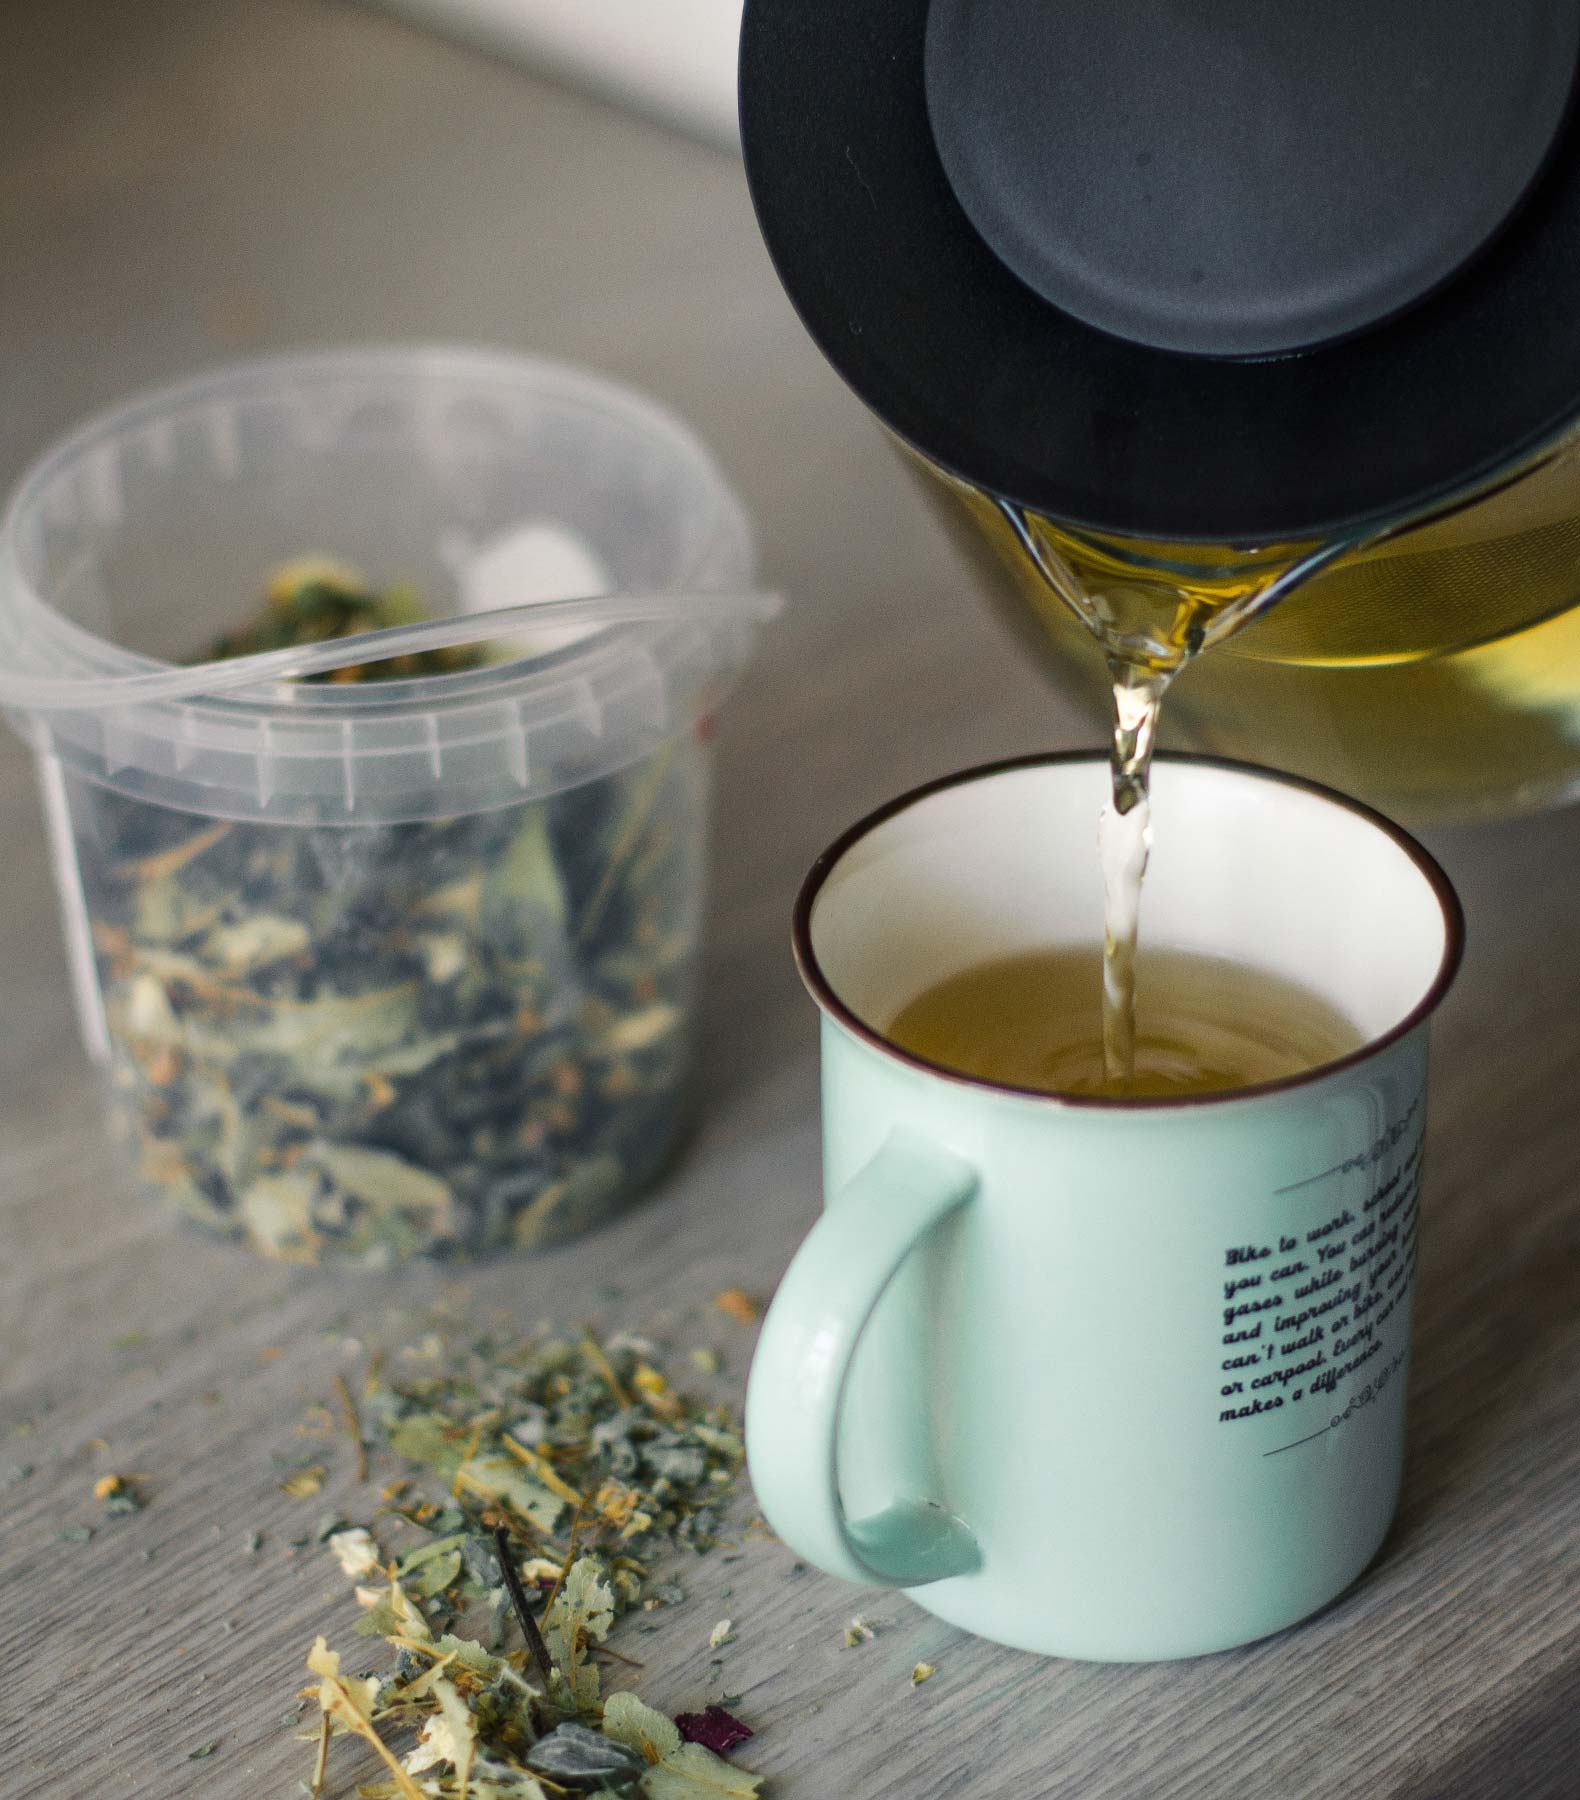 Green Teas - There's More Than Just Sencha